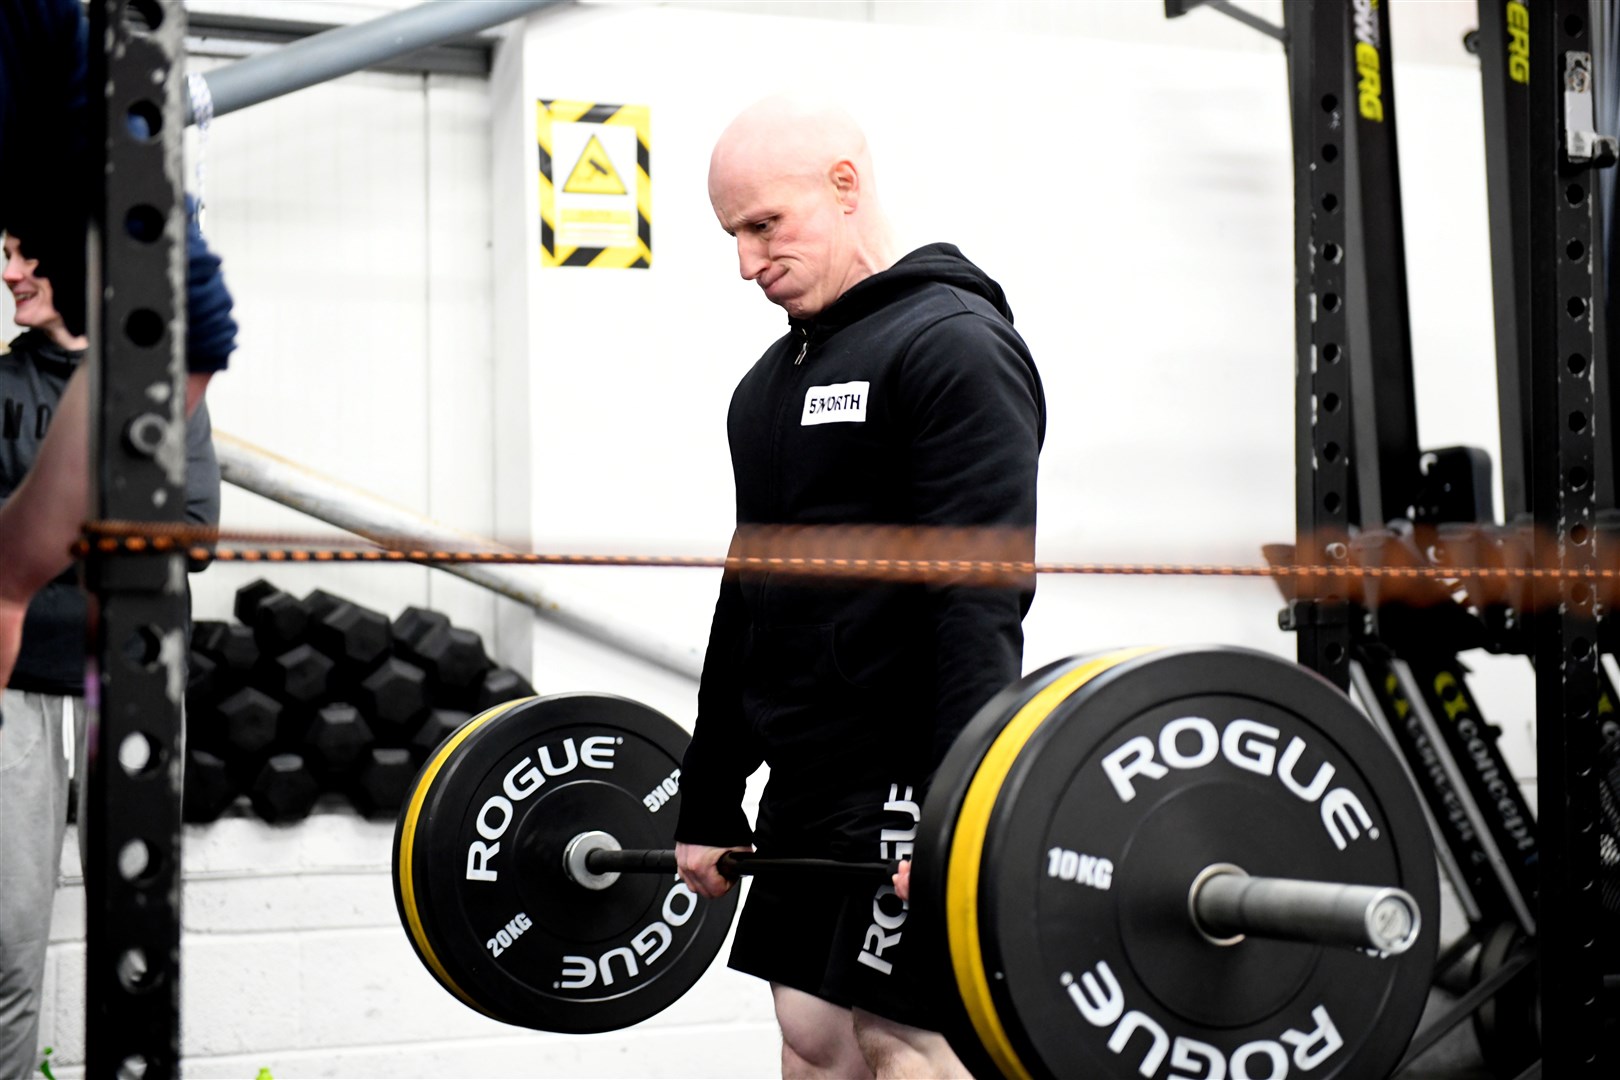 Donnie Beaton, the owner of Crossfit 57 North Gym, warming up. Picture: James Mackenzie